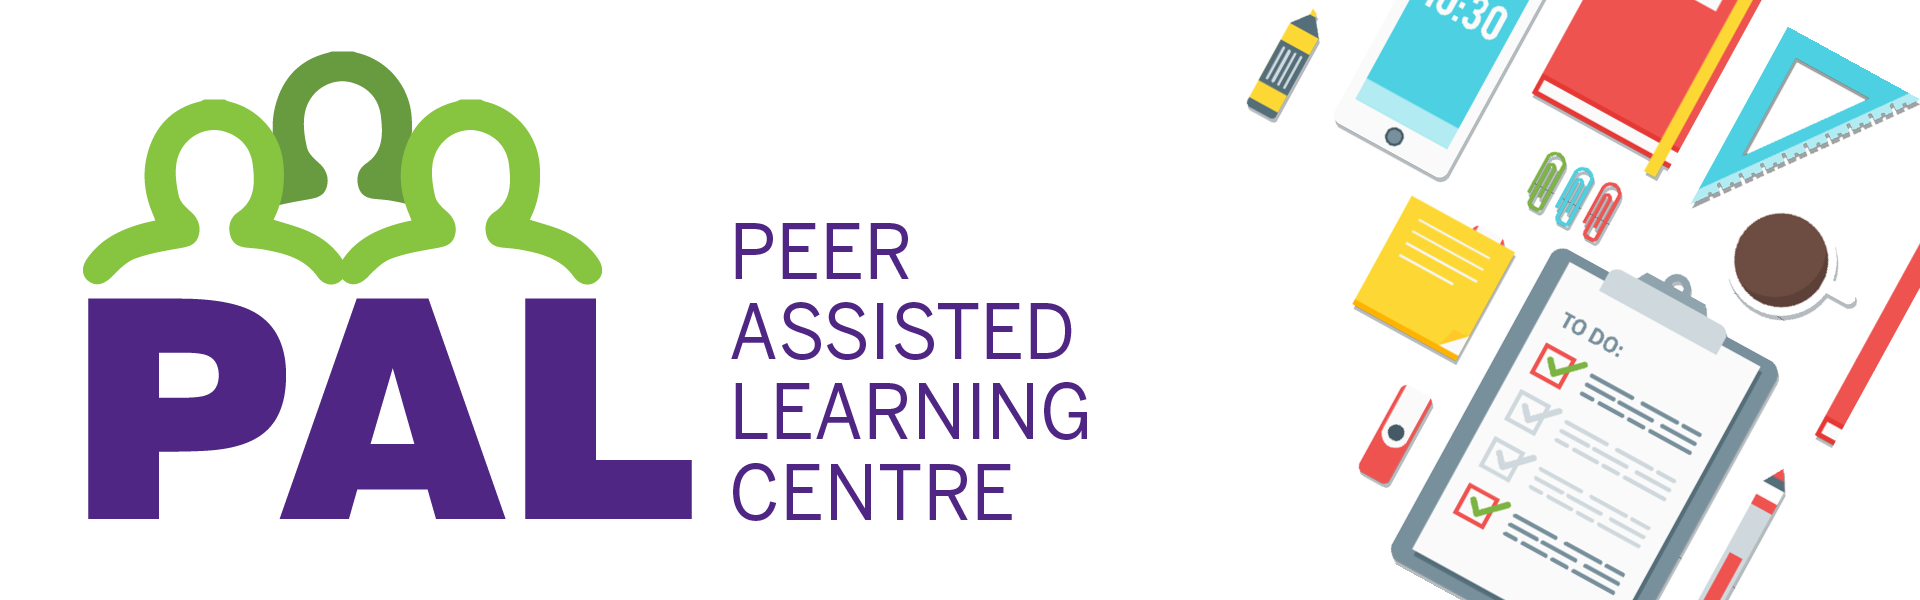 Text reading Peer Assisted Learning Centre, with animated icons of study materials